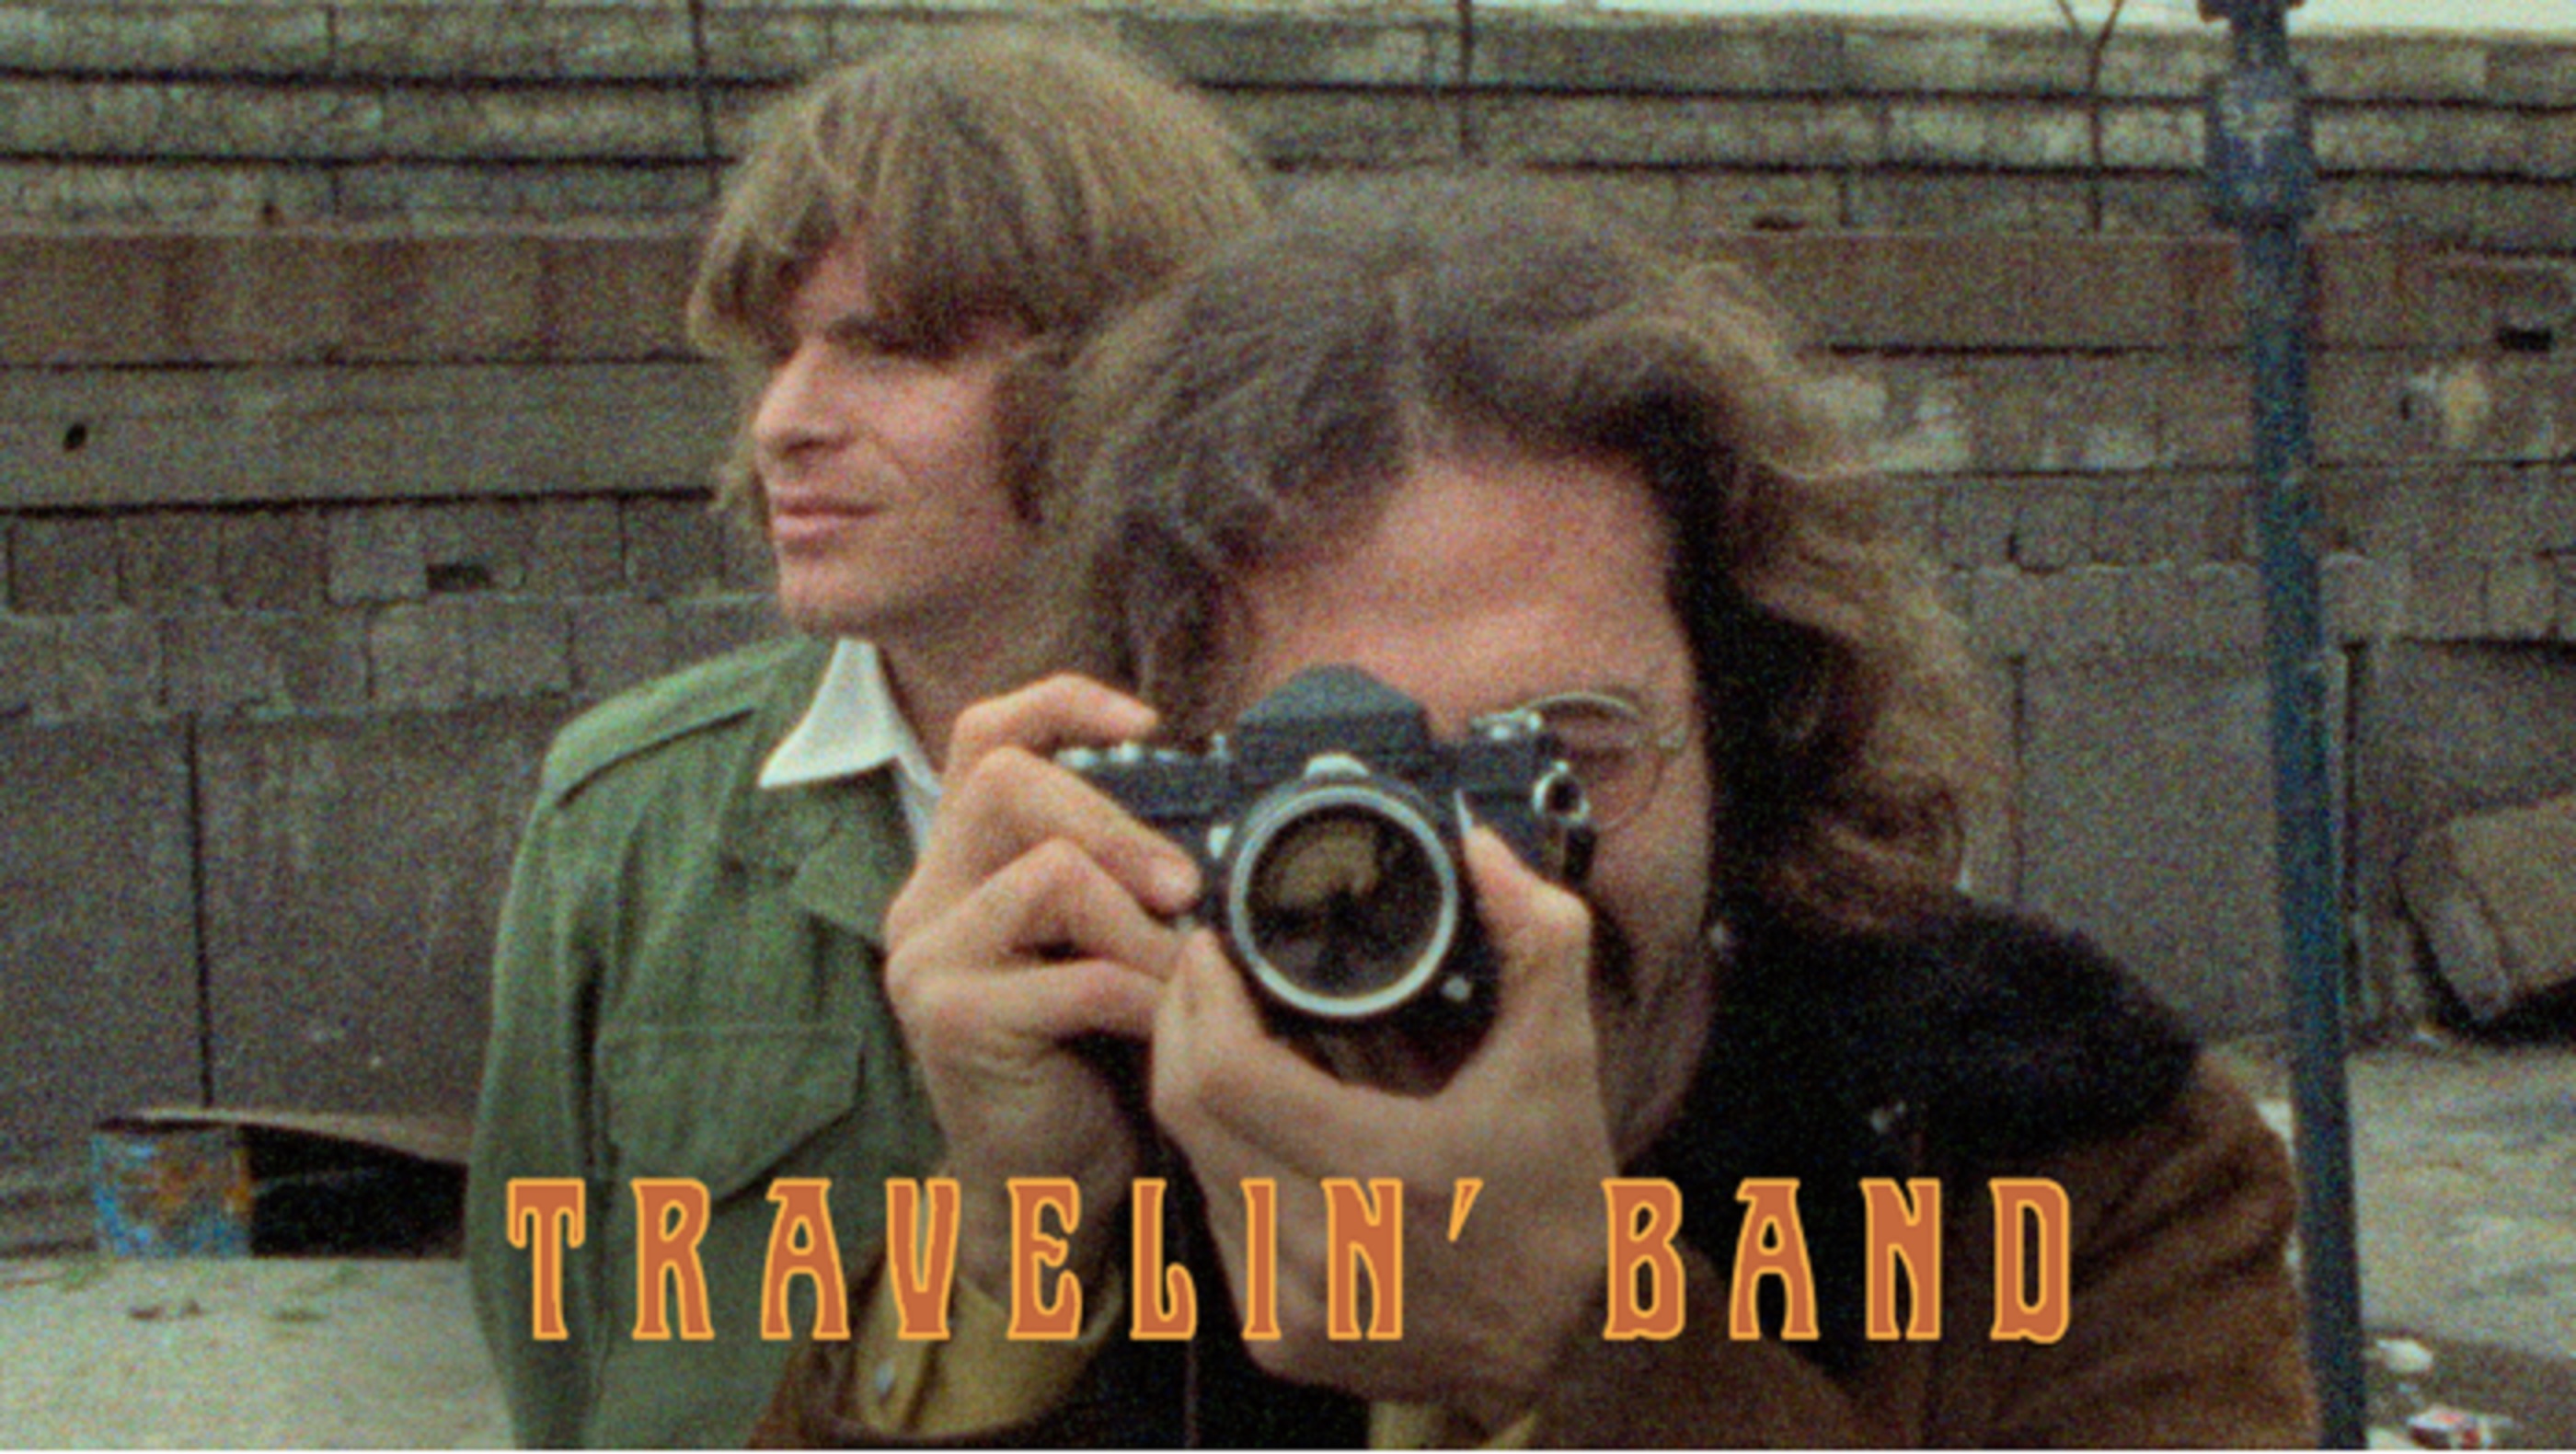 Creedence Clearwater Revival's New Music Video for "Travelin' Band" Out Today